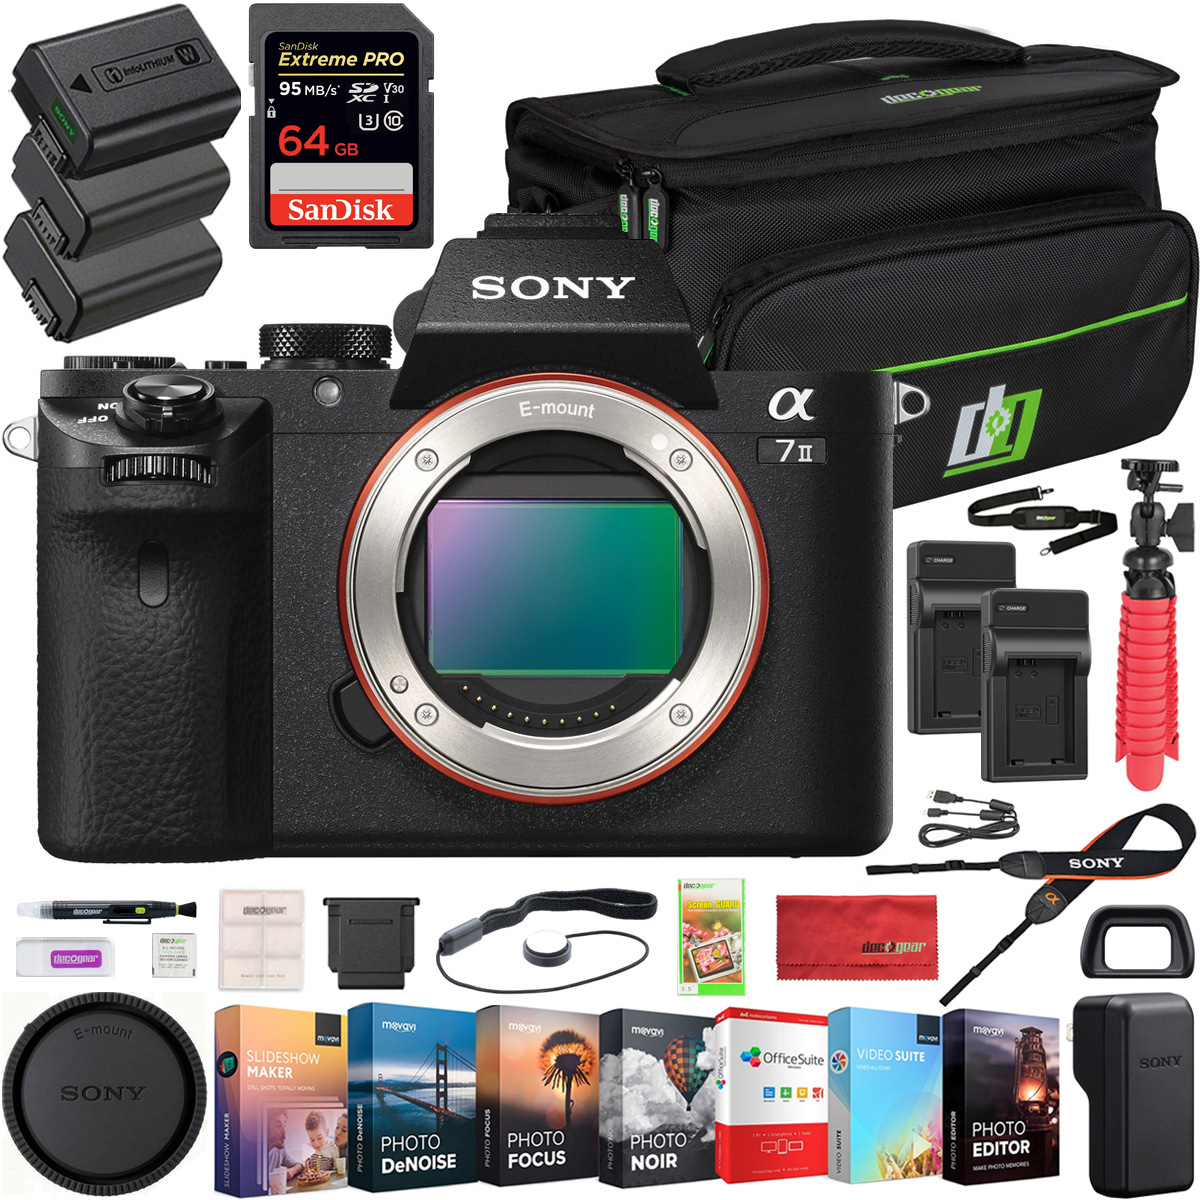 Sony a7 II Full-Frame Alpha Mirrorless Digital Camera 24MP (Black) Body Only a7II ILCE-7M2 - image 1 of 10